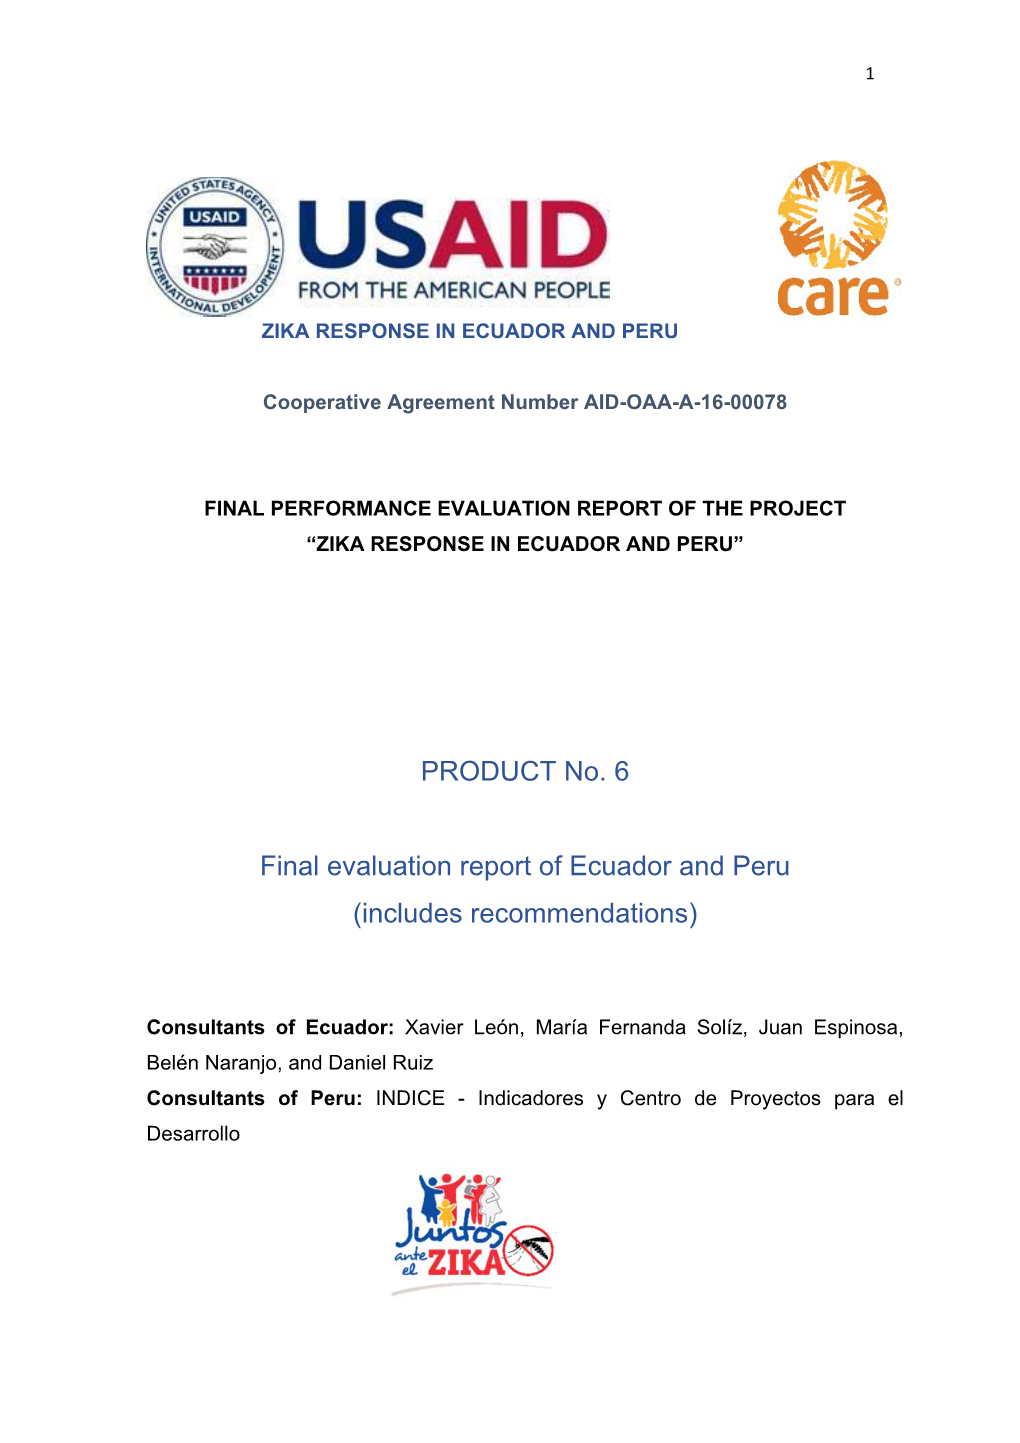 PRODUCT No. 6 Final Evaluation Report of Ecuador and Peru (Includes Recommendations)